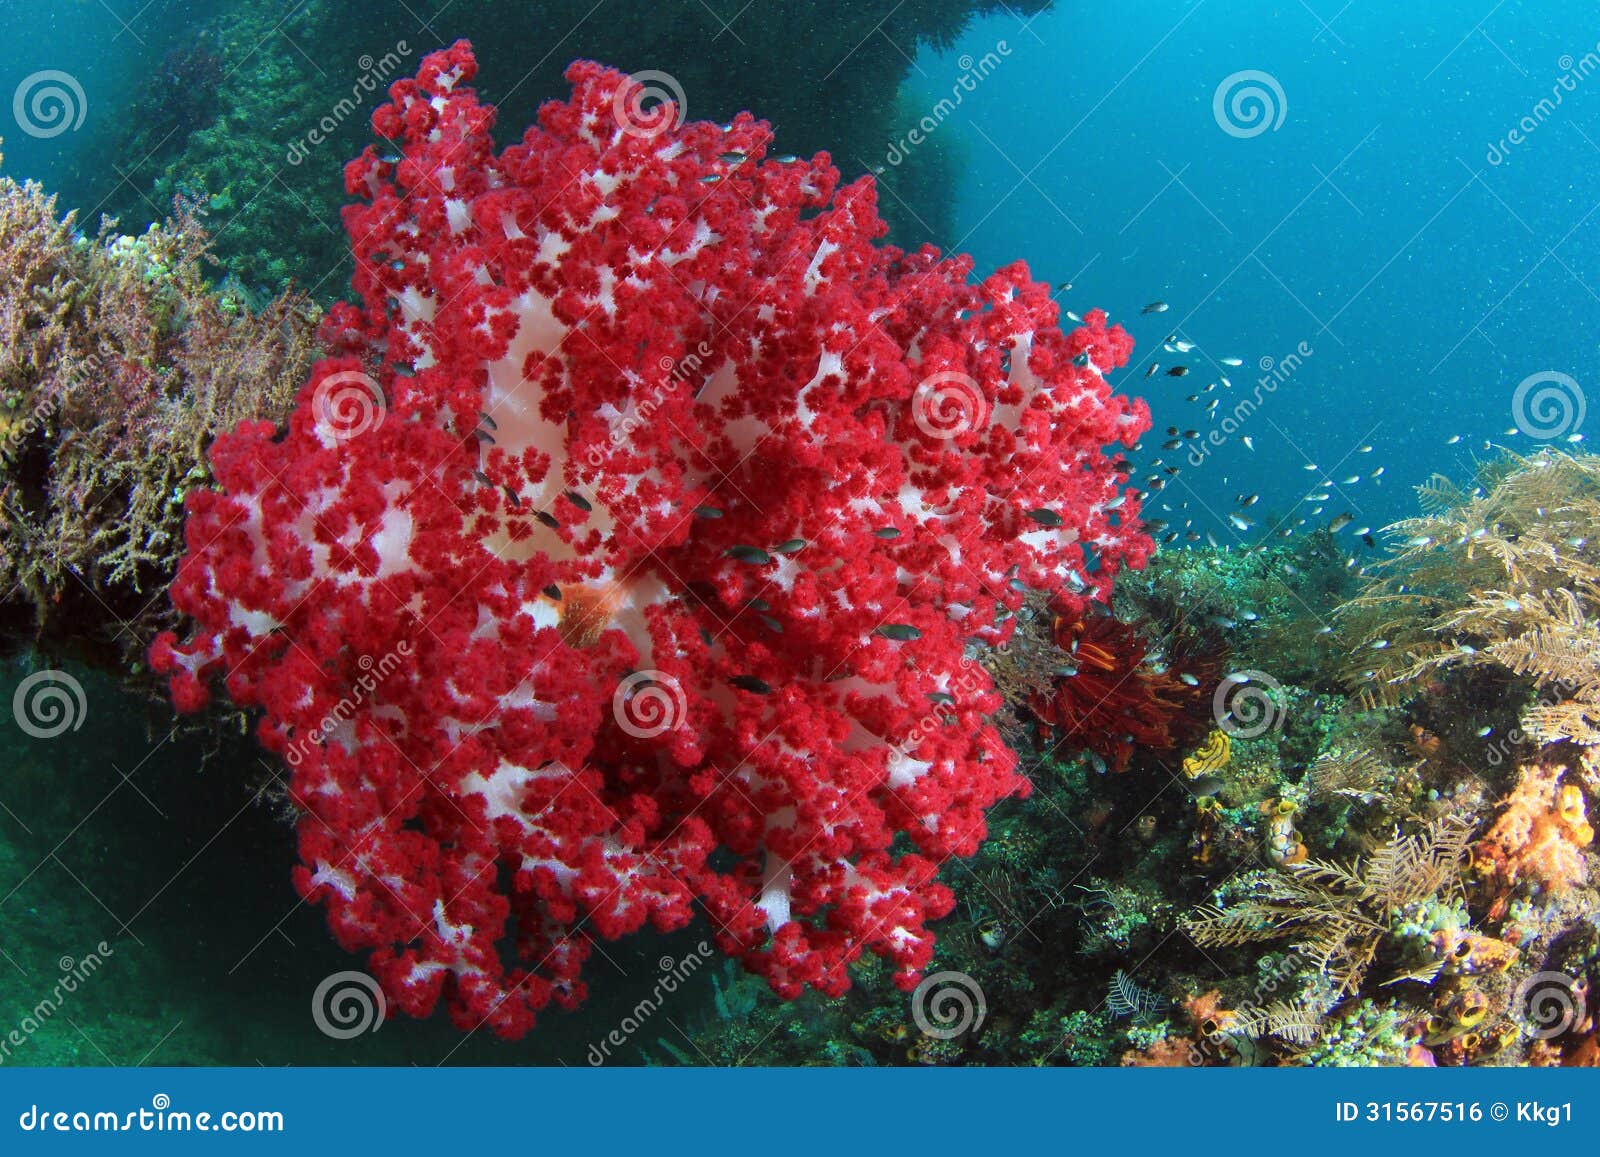 coral reefs and fishes